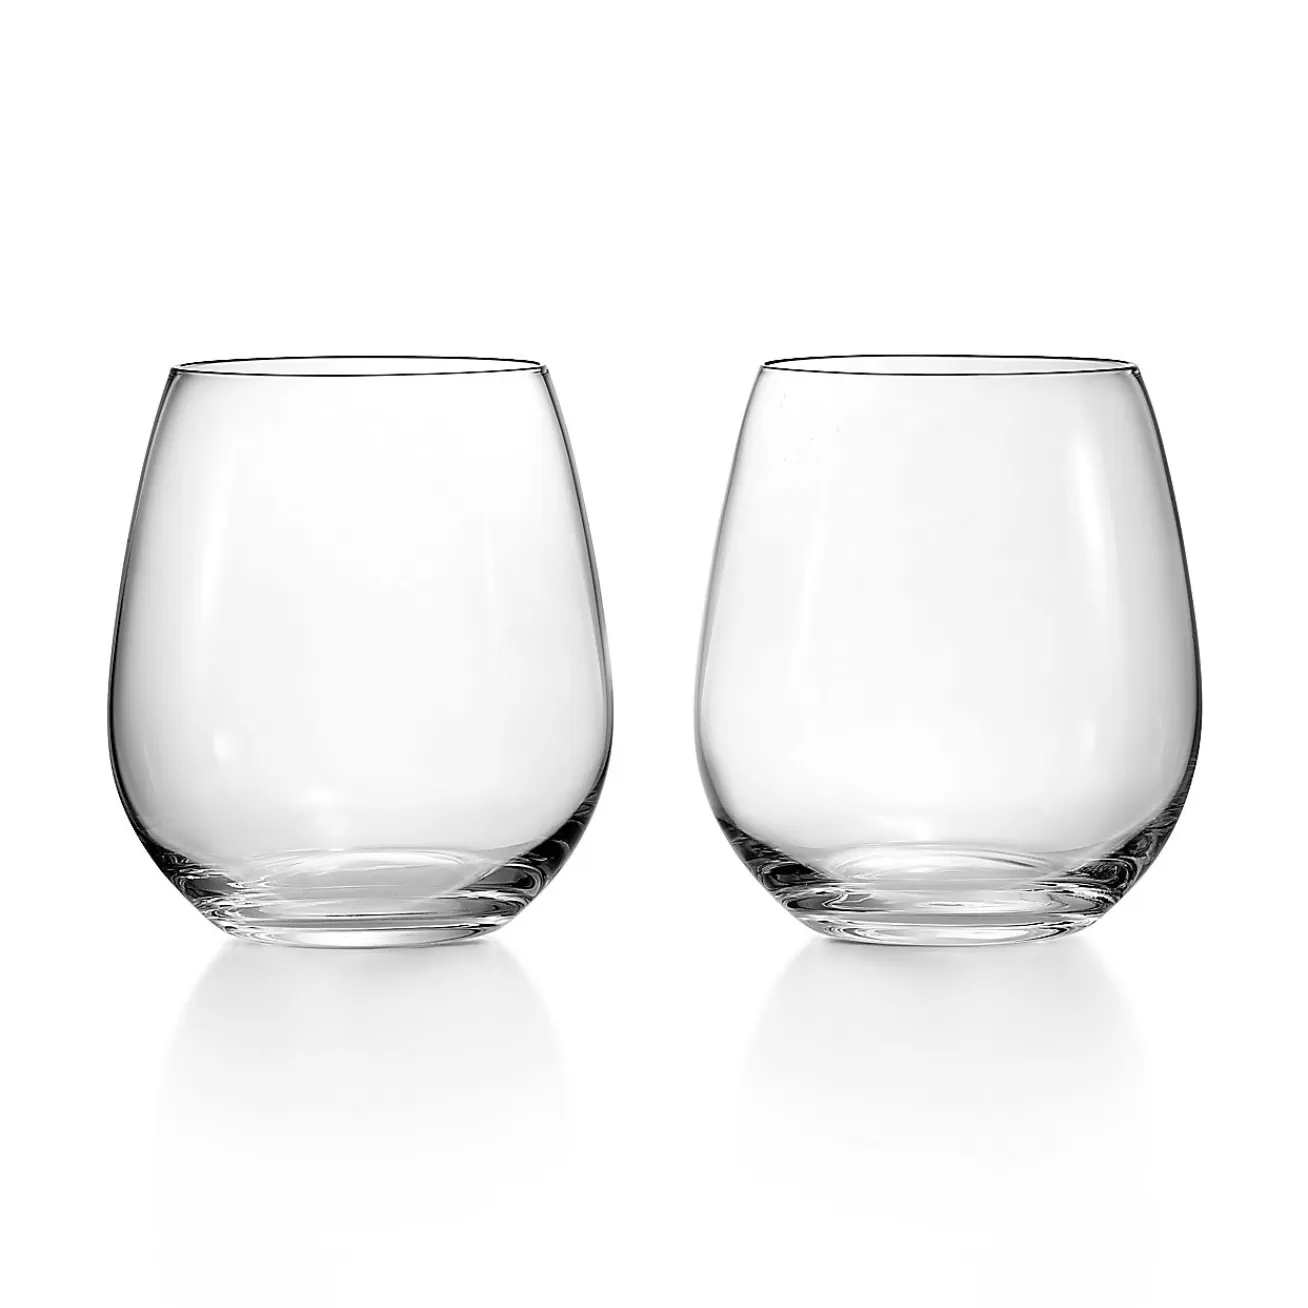 Tiffany & Co. Tiffany Home Essentials Stemless Red Wine Glasses in Crystal Glass, Set of Two | ^ The Home | Housewarming Gifts